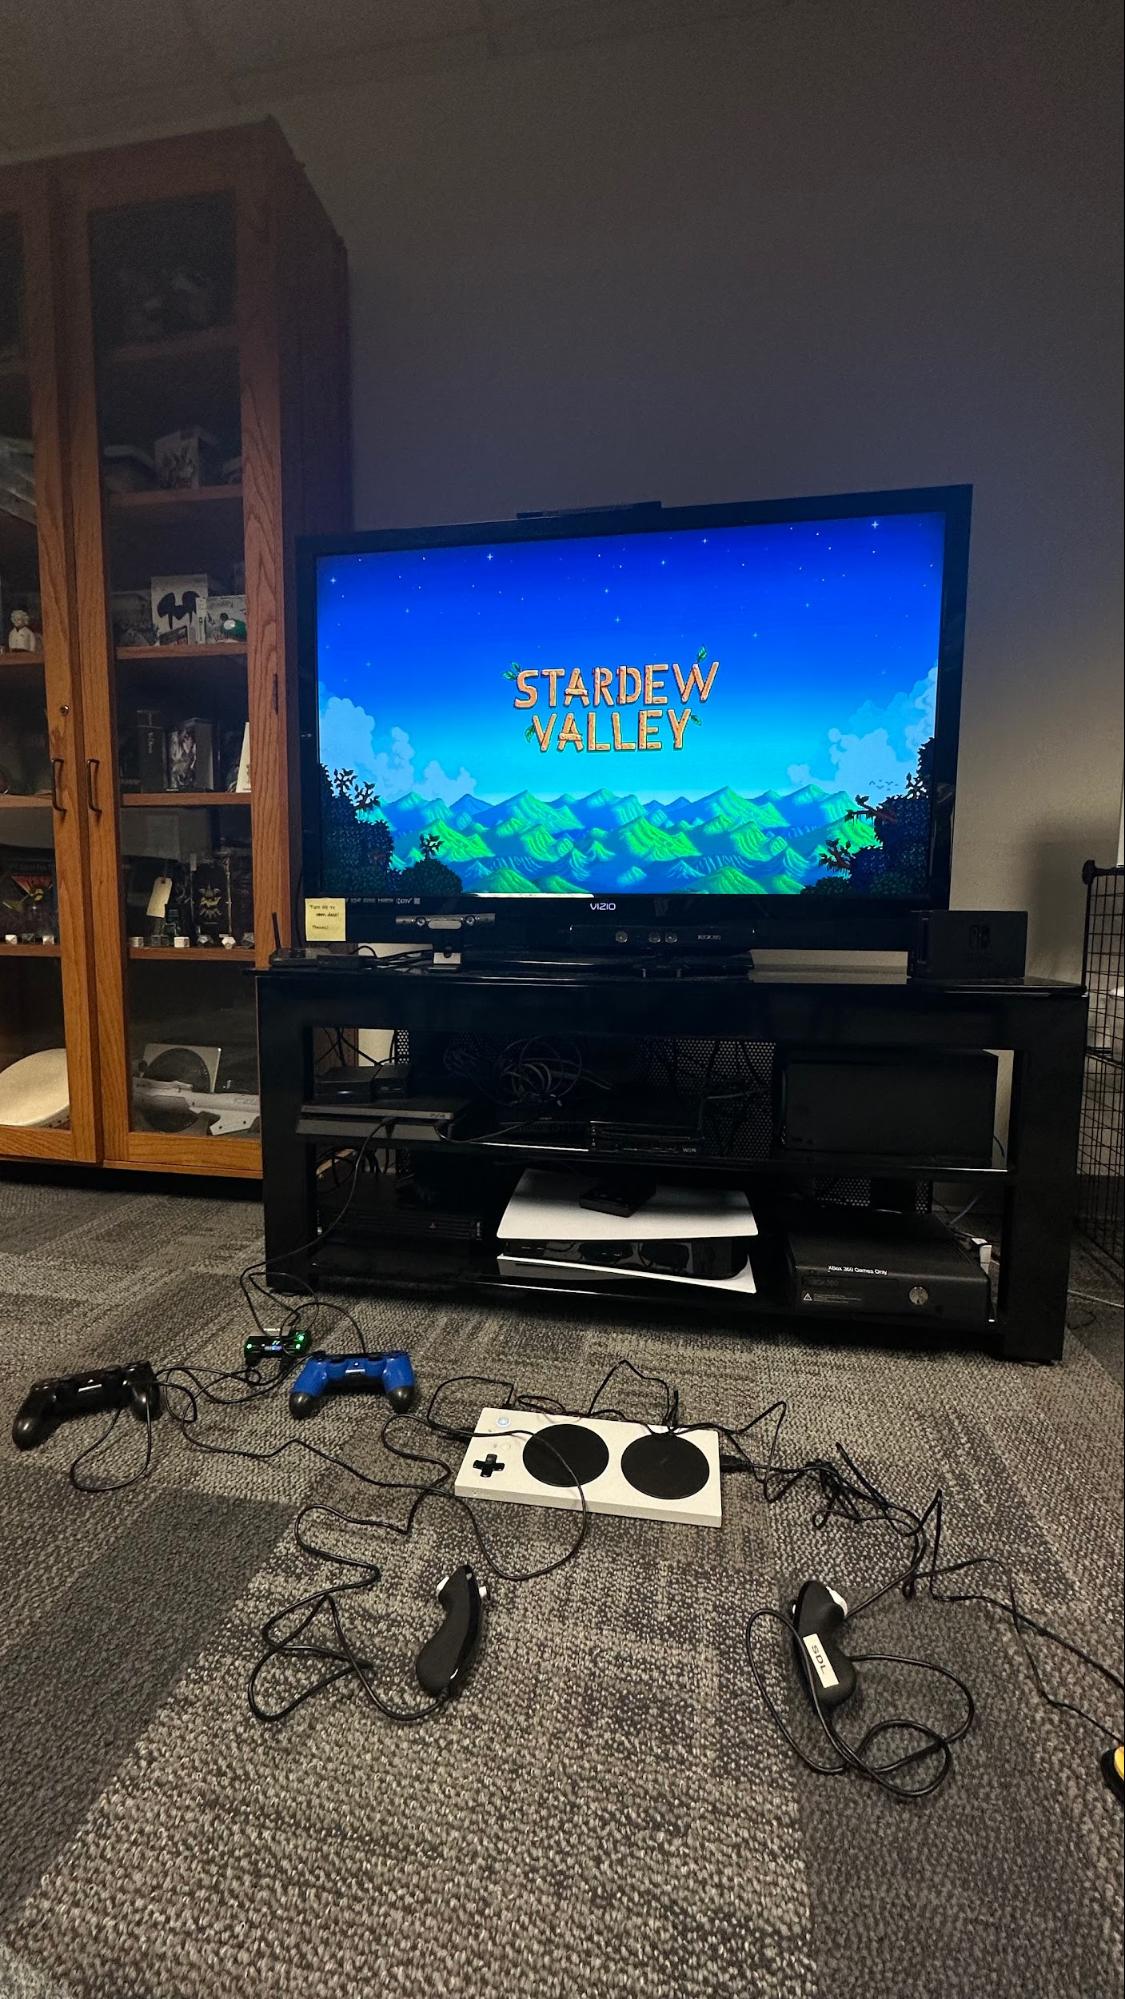 An Xbox Adaptive contrller with various controllers attached, and Stardew Velley splash screen on the television